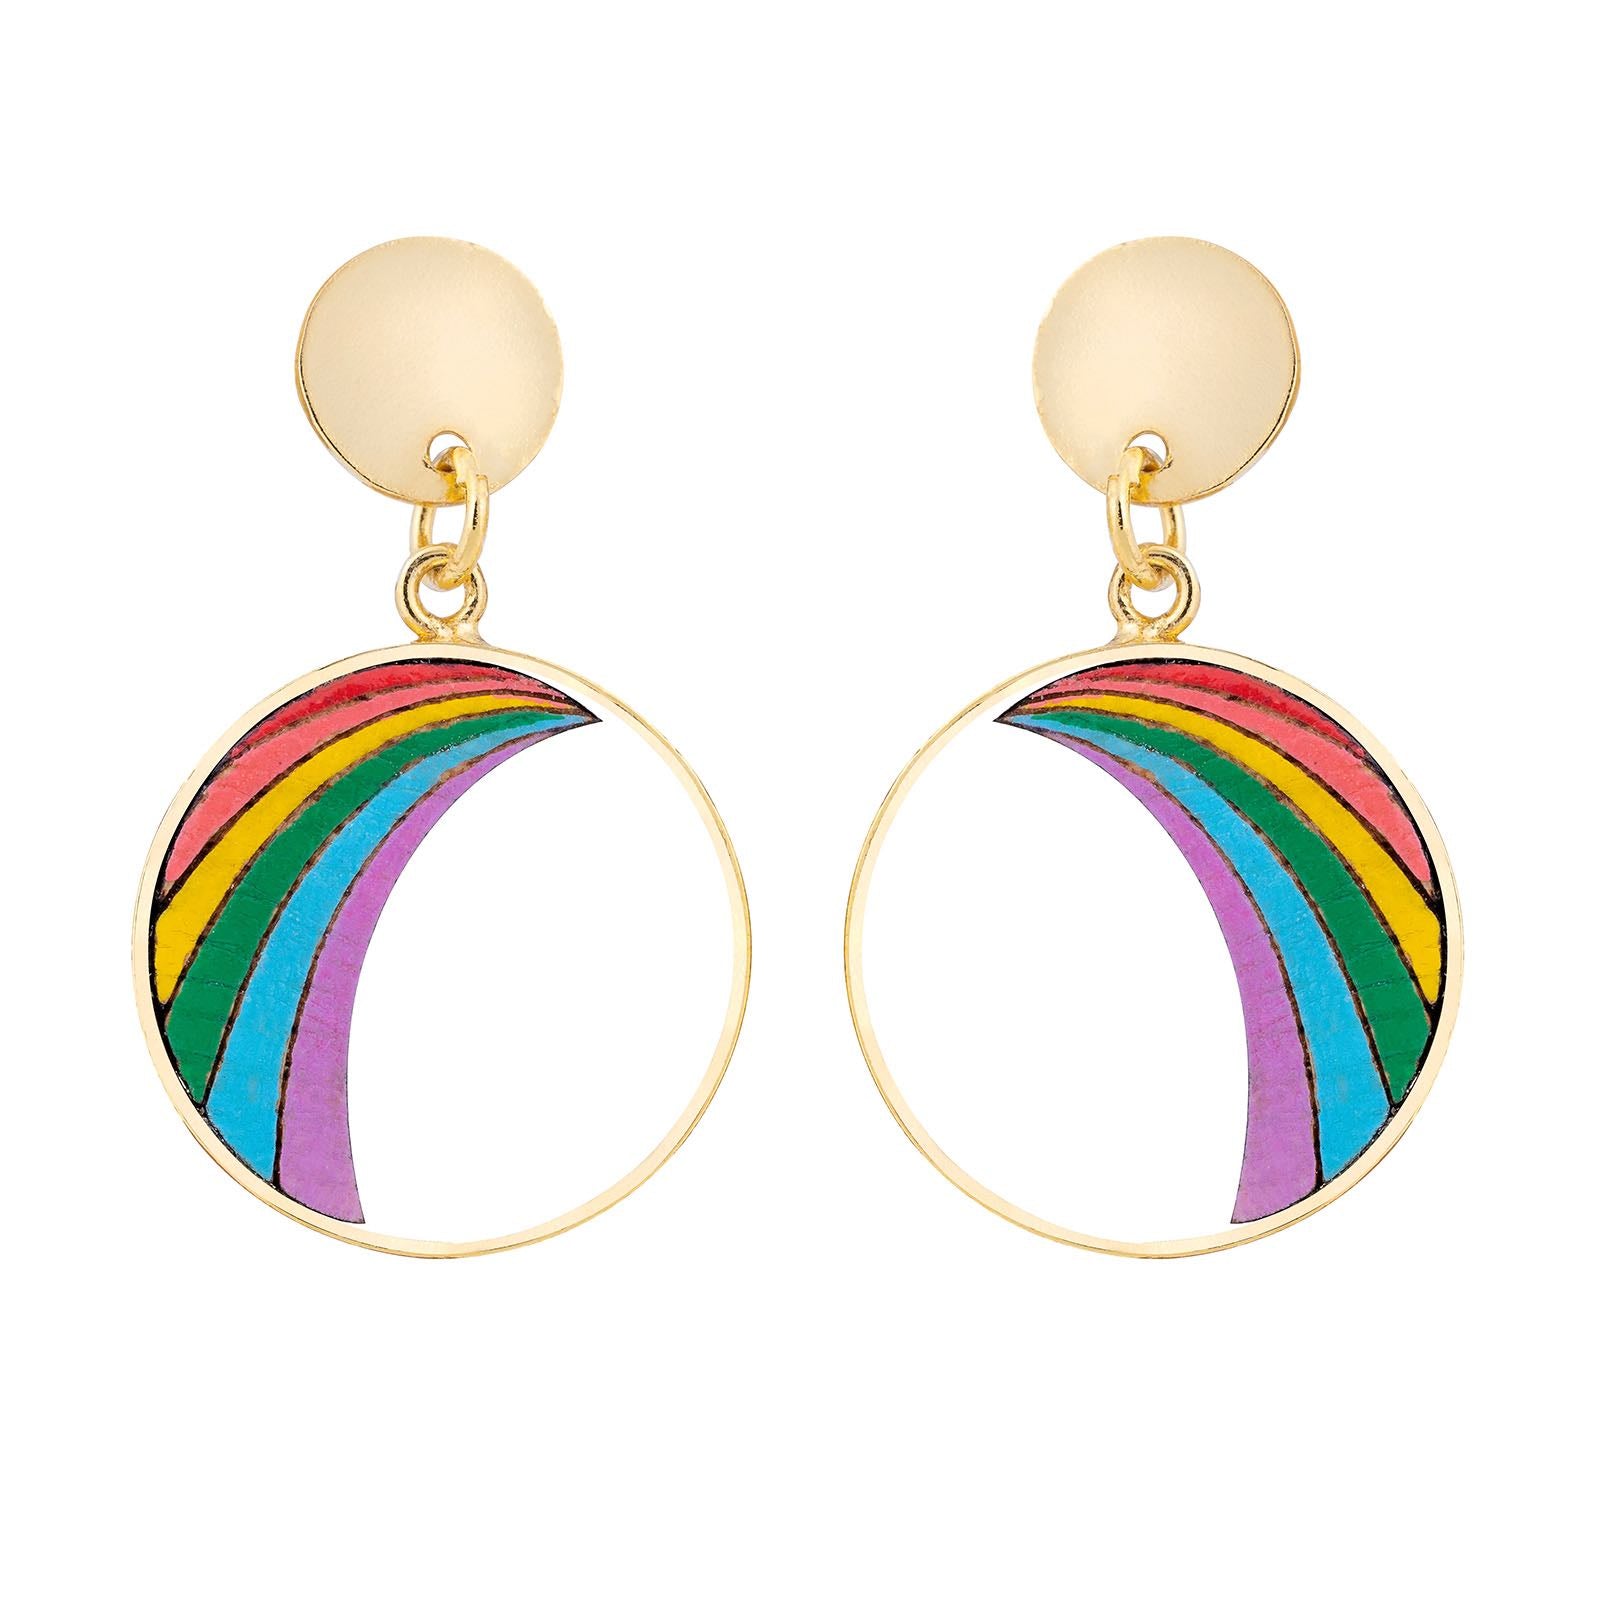 Rainbow Eco-friendly Recycled Wood Gold Earrings